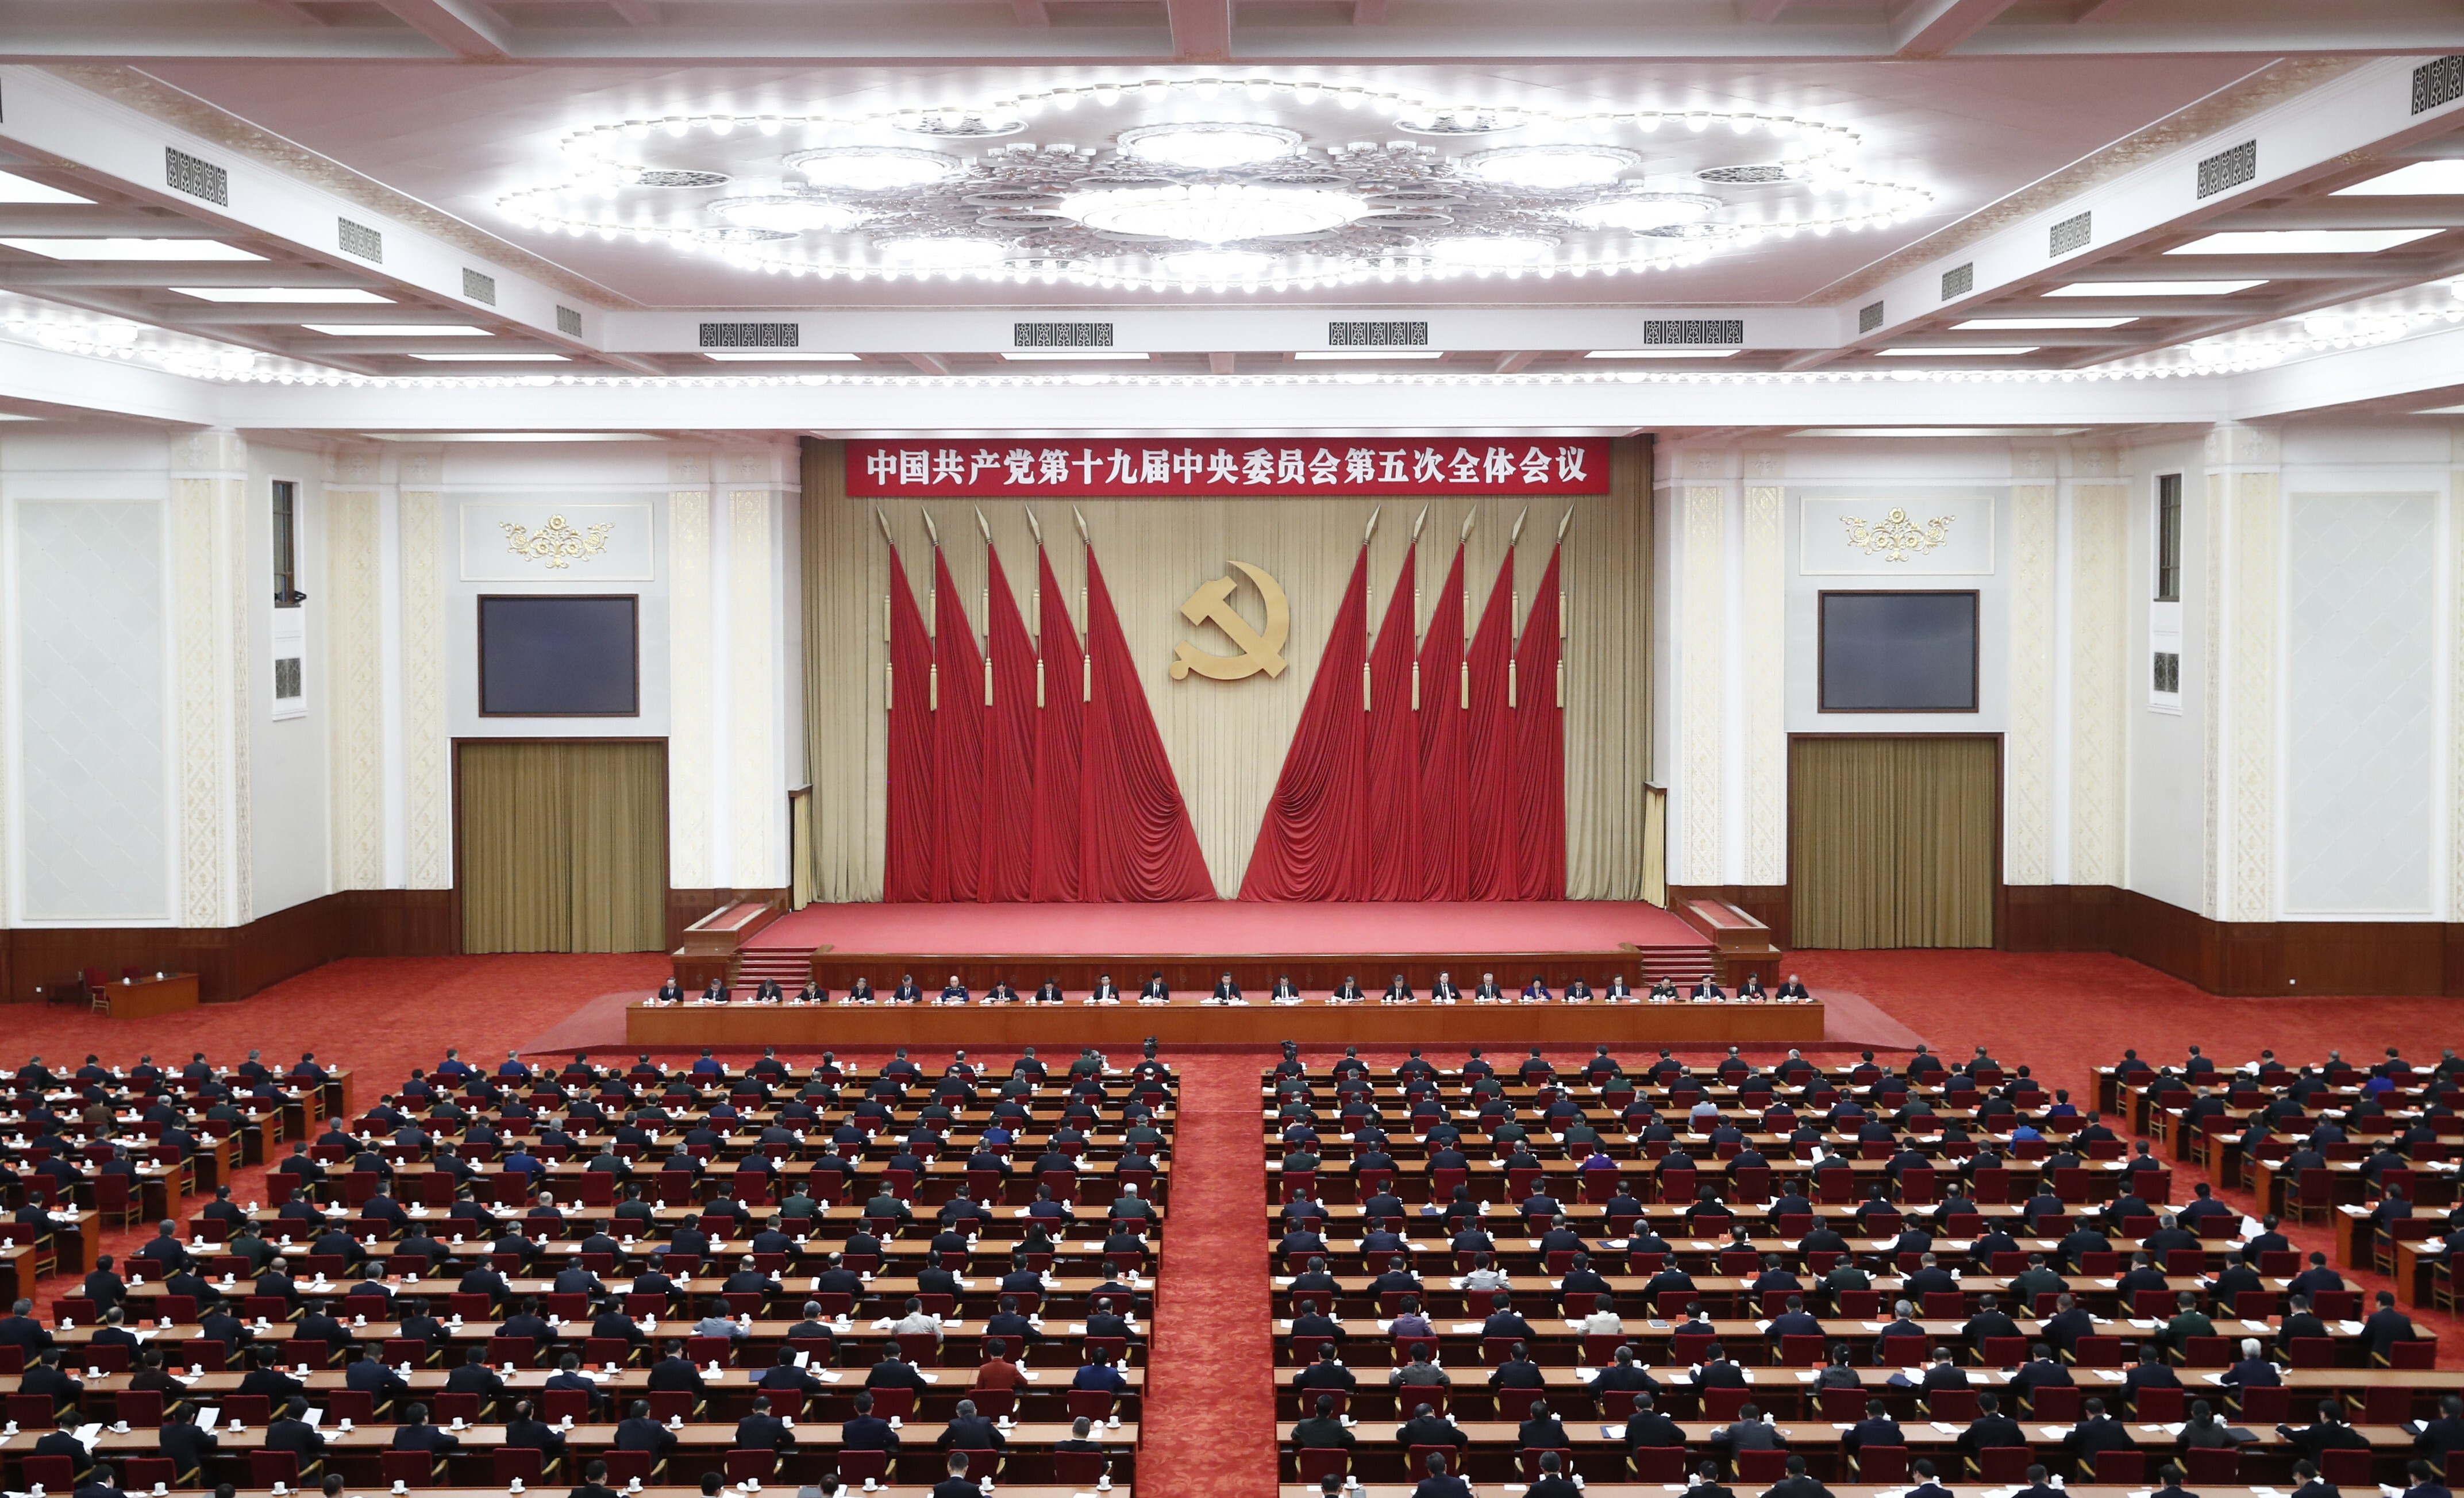 The November plenum will focus on “the major achievements and historical experience of the party’s struggle in the past century”. Photo: Xinhua